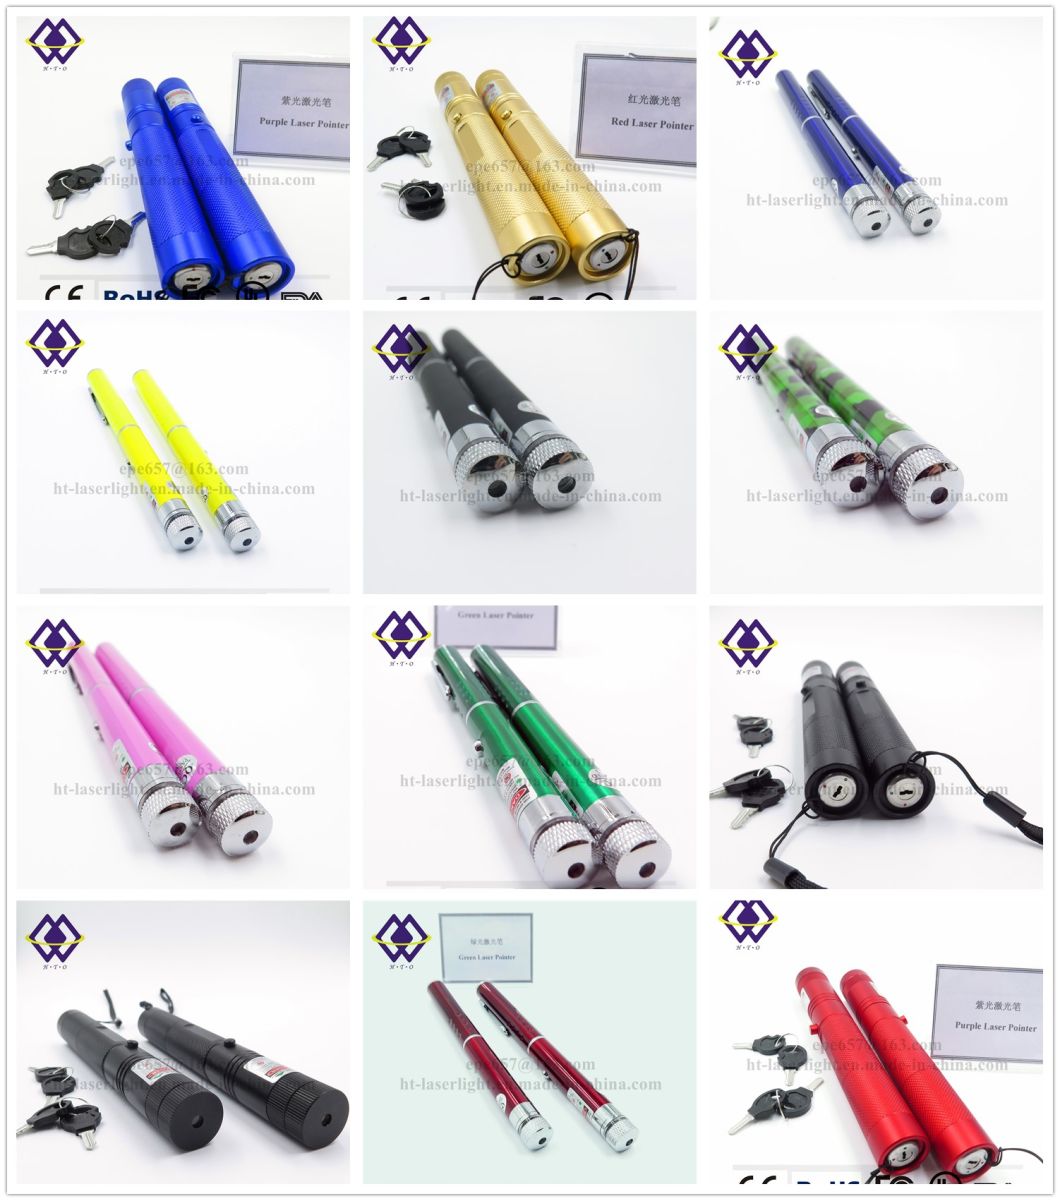 Buy Strong Wholesale High Quality Rechargeble Red Laser Pointer Pen